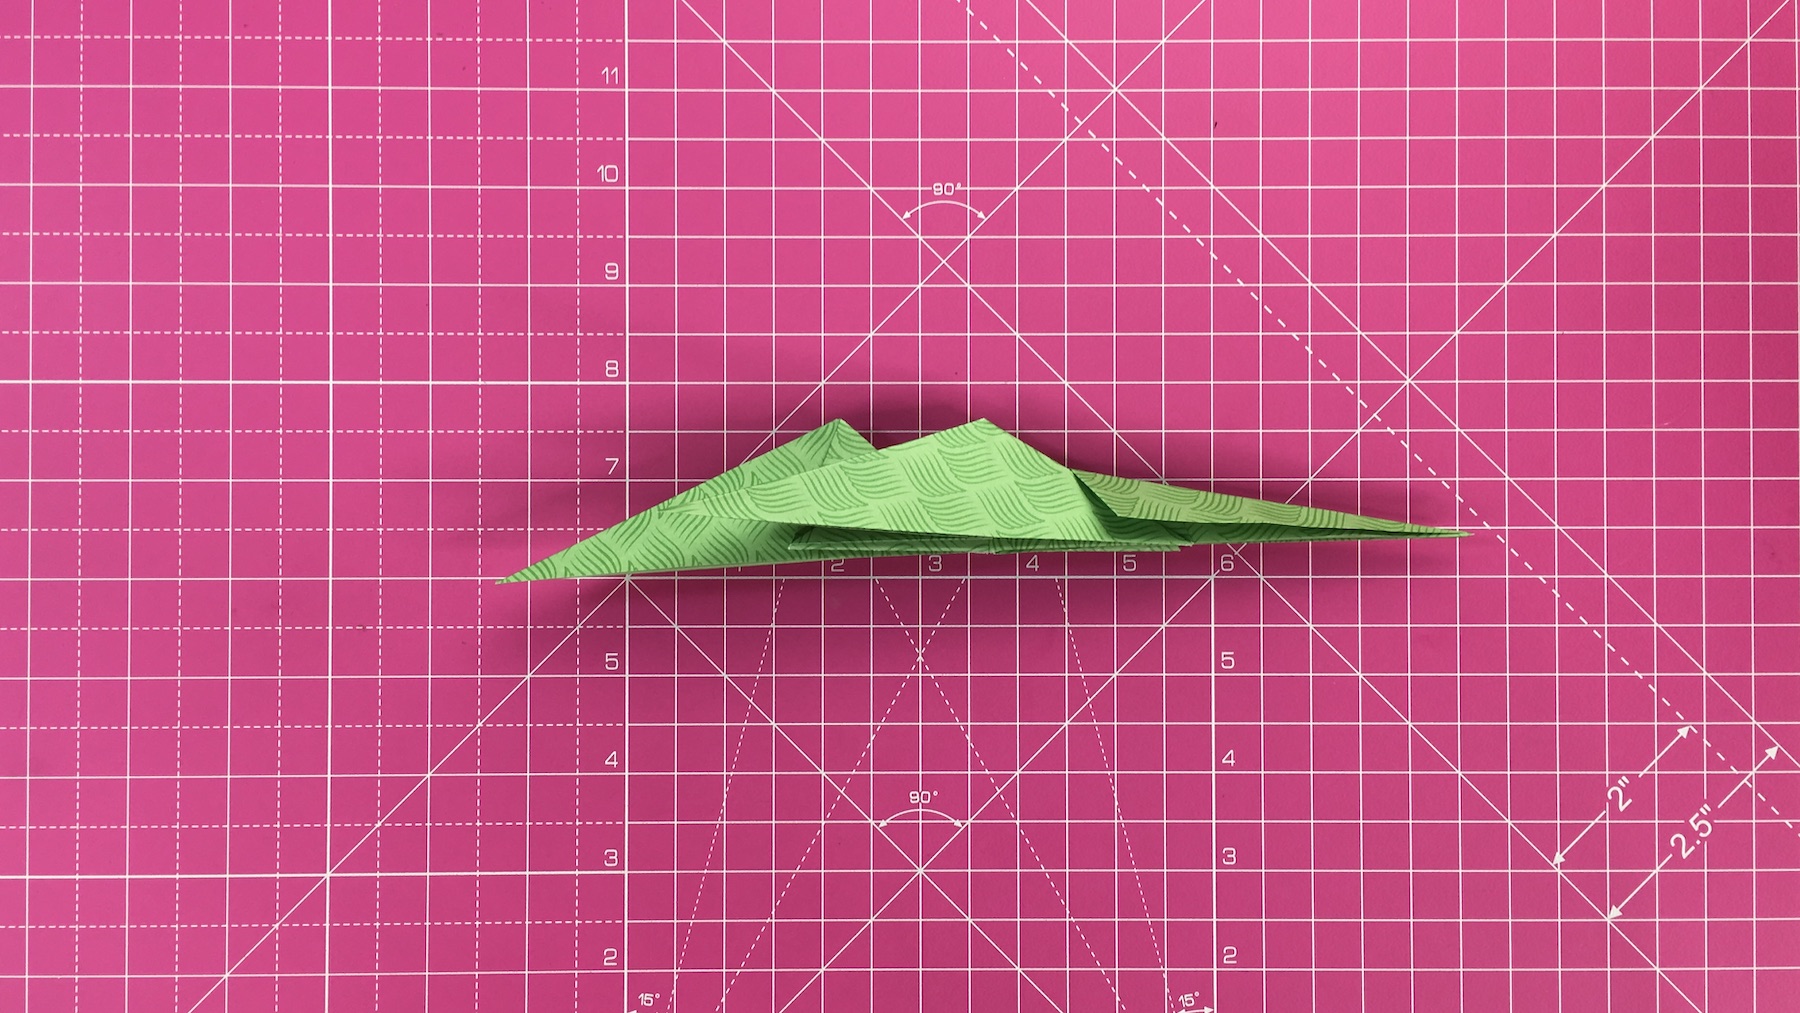 How to make an origami dragon, origami dragon tutorial - step 32b